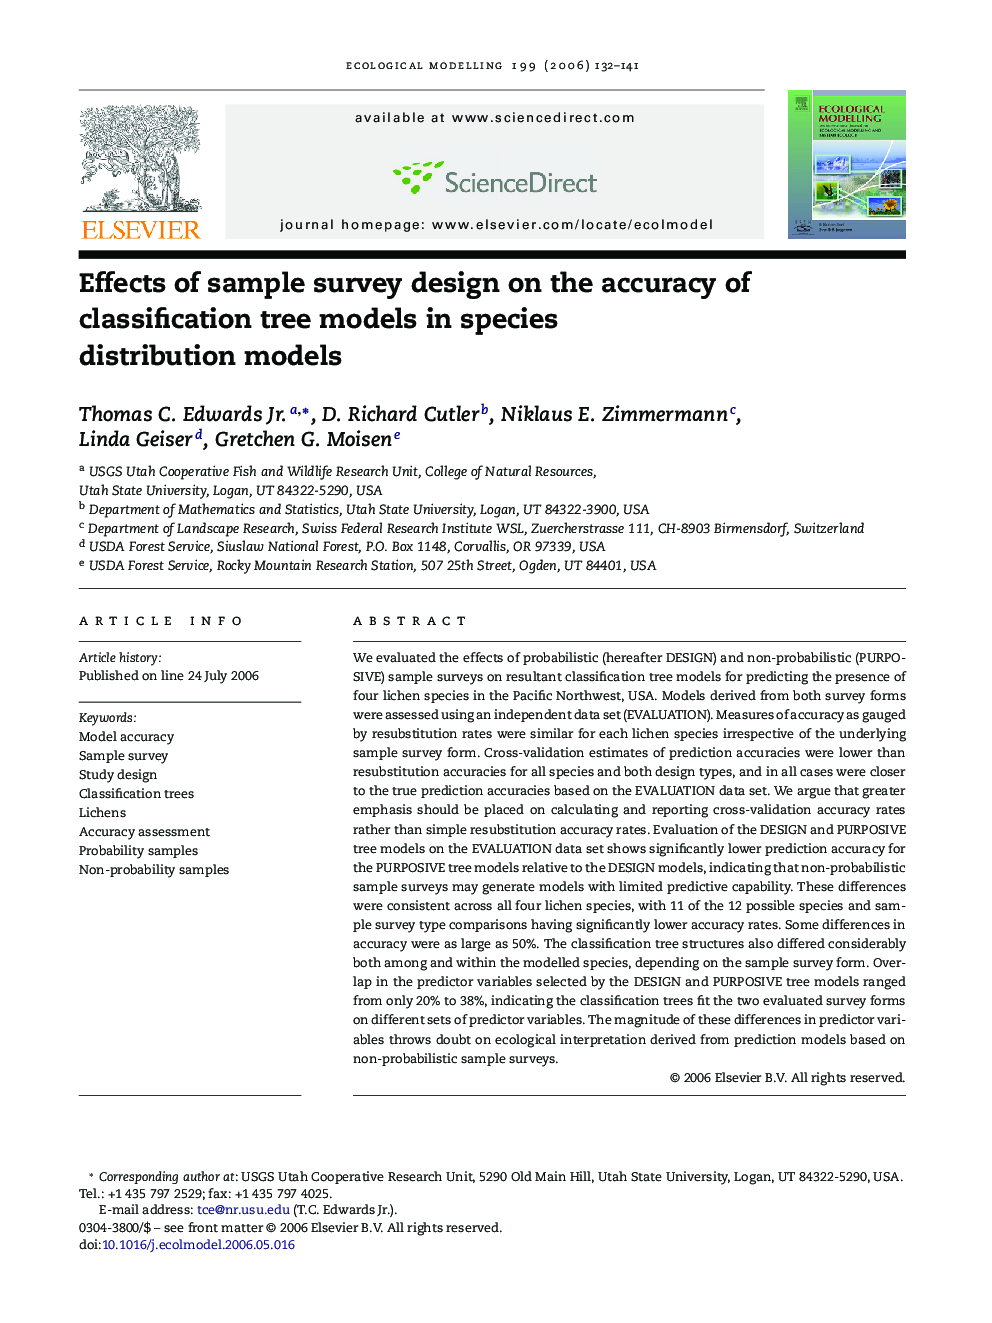 Effects of sample survey design on the accuracy of classification tree models in species distribution models